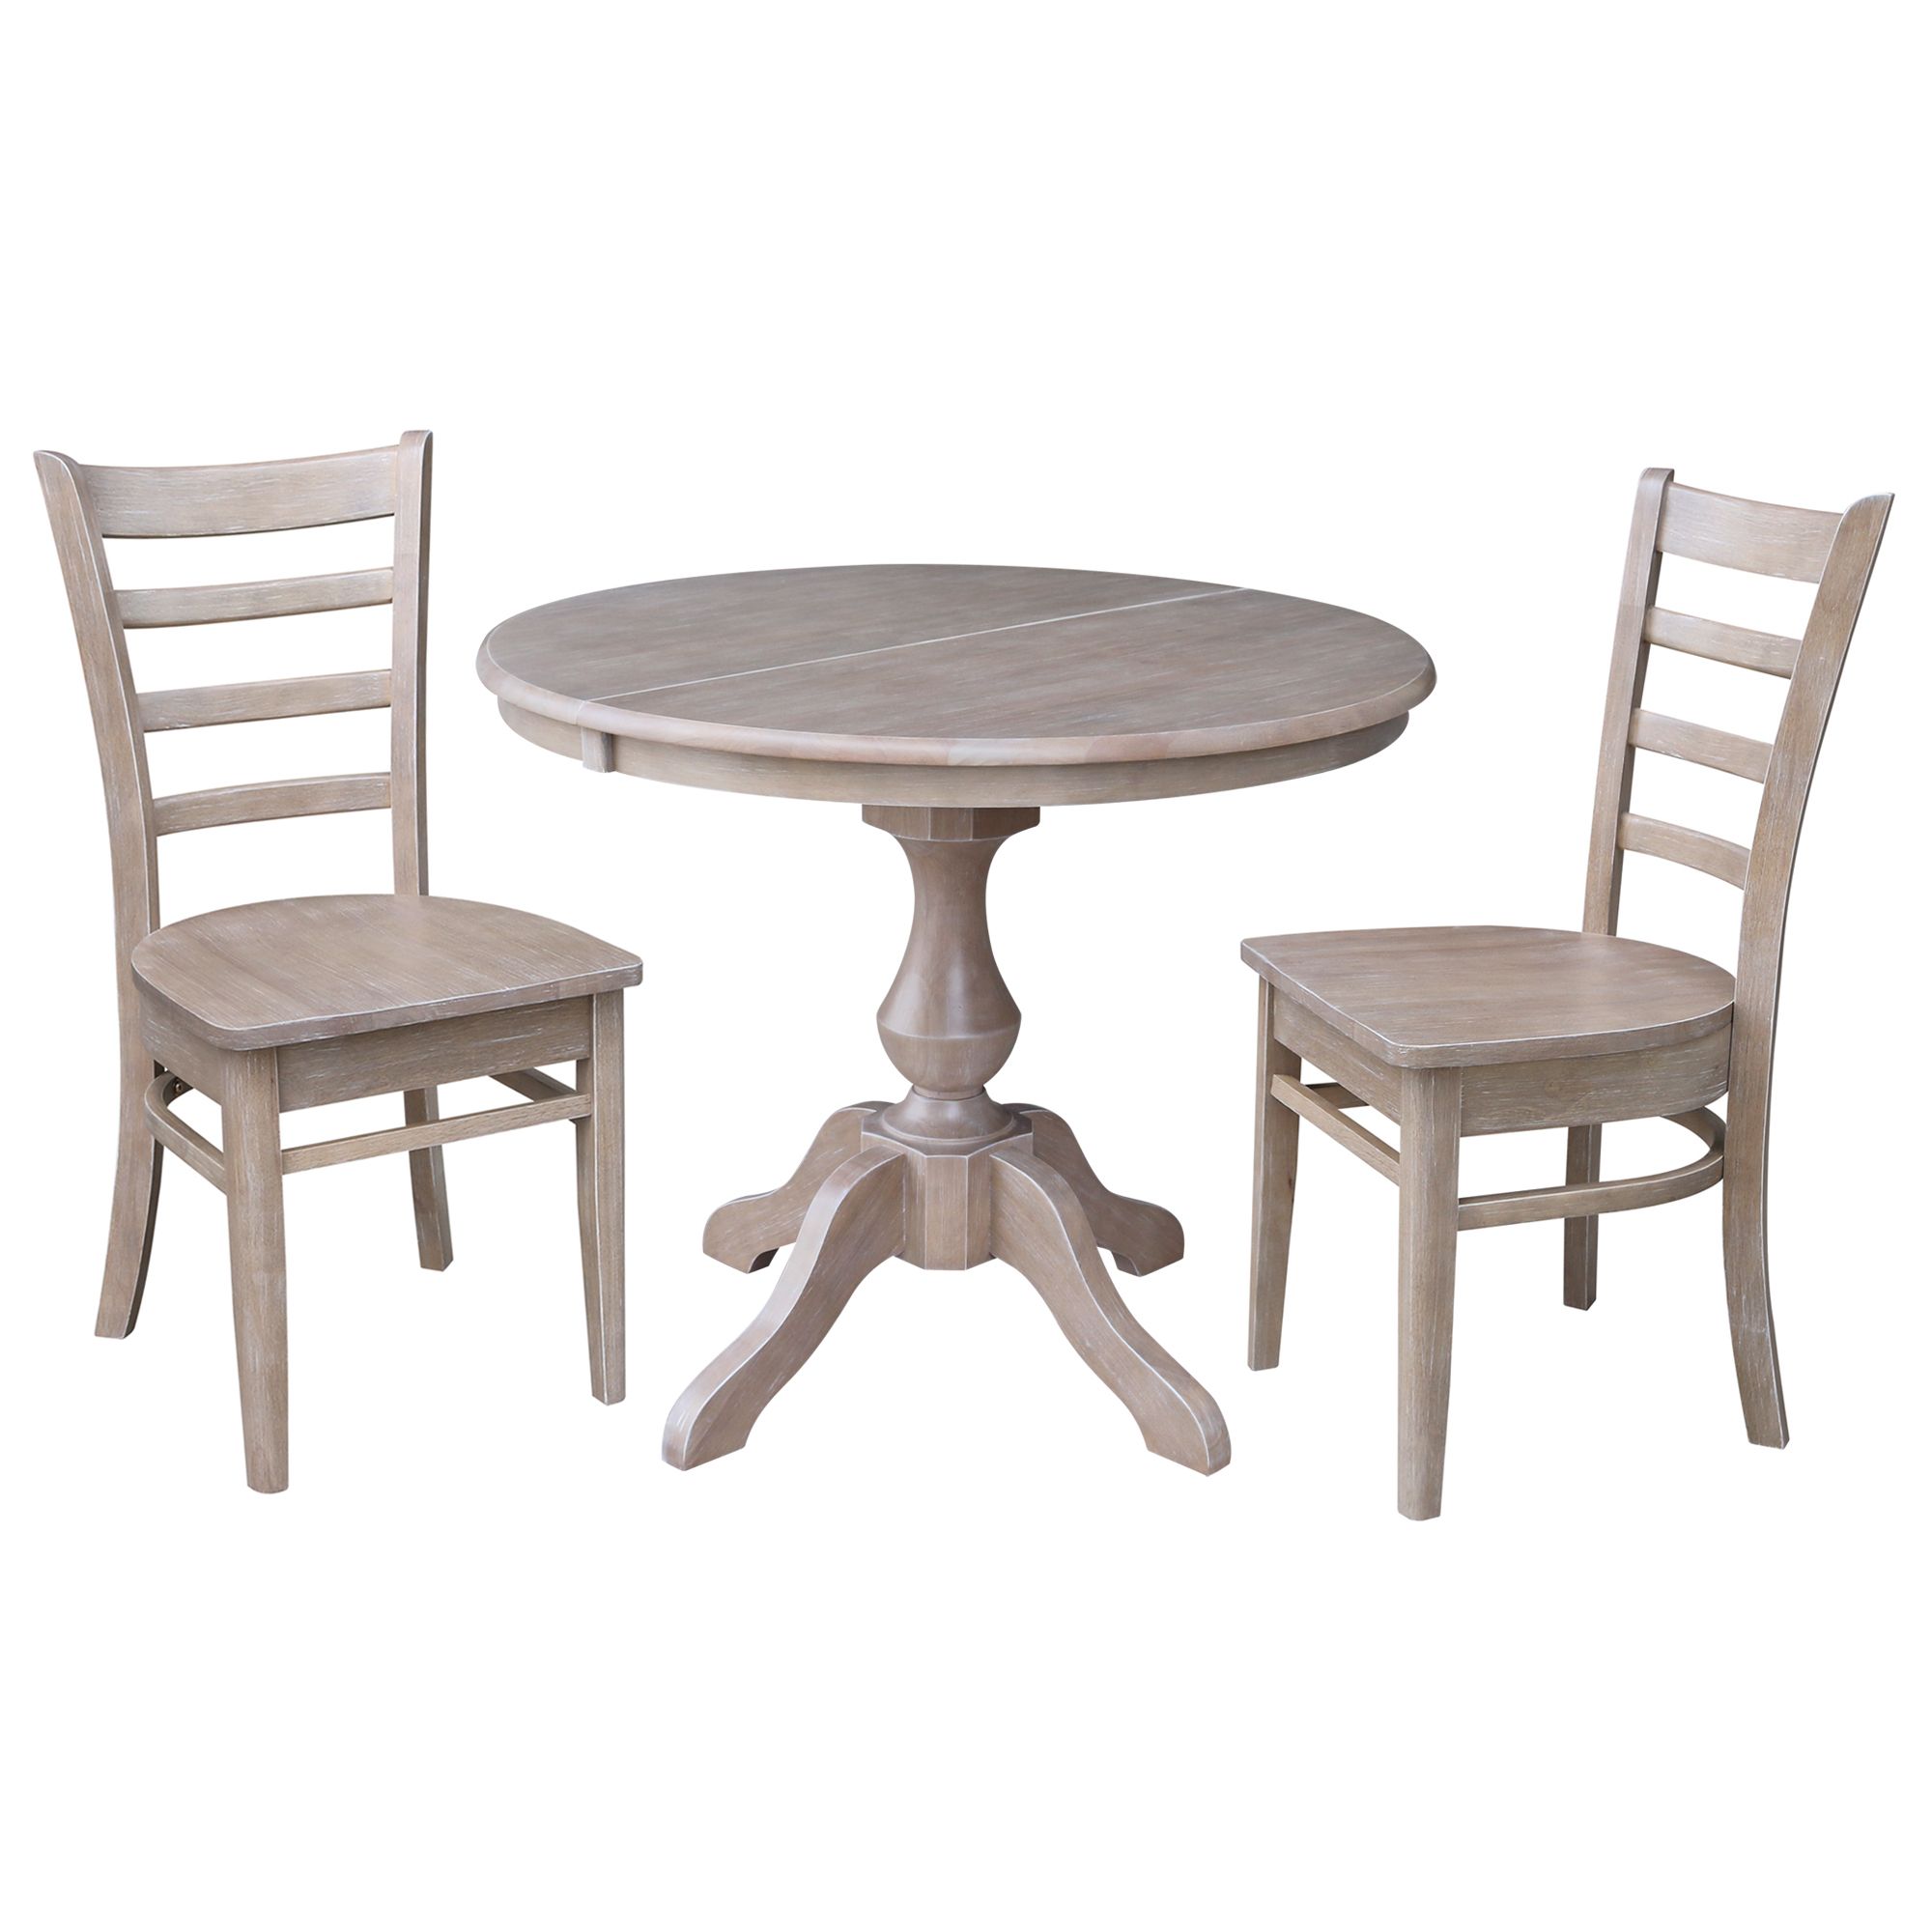 36" Round Dining Table With 12" Leaf And 2 Emily Chairs Inside Leaf Round Console Tables (View 15 of 20)